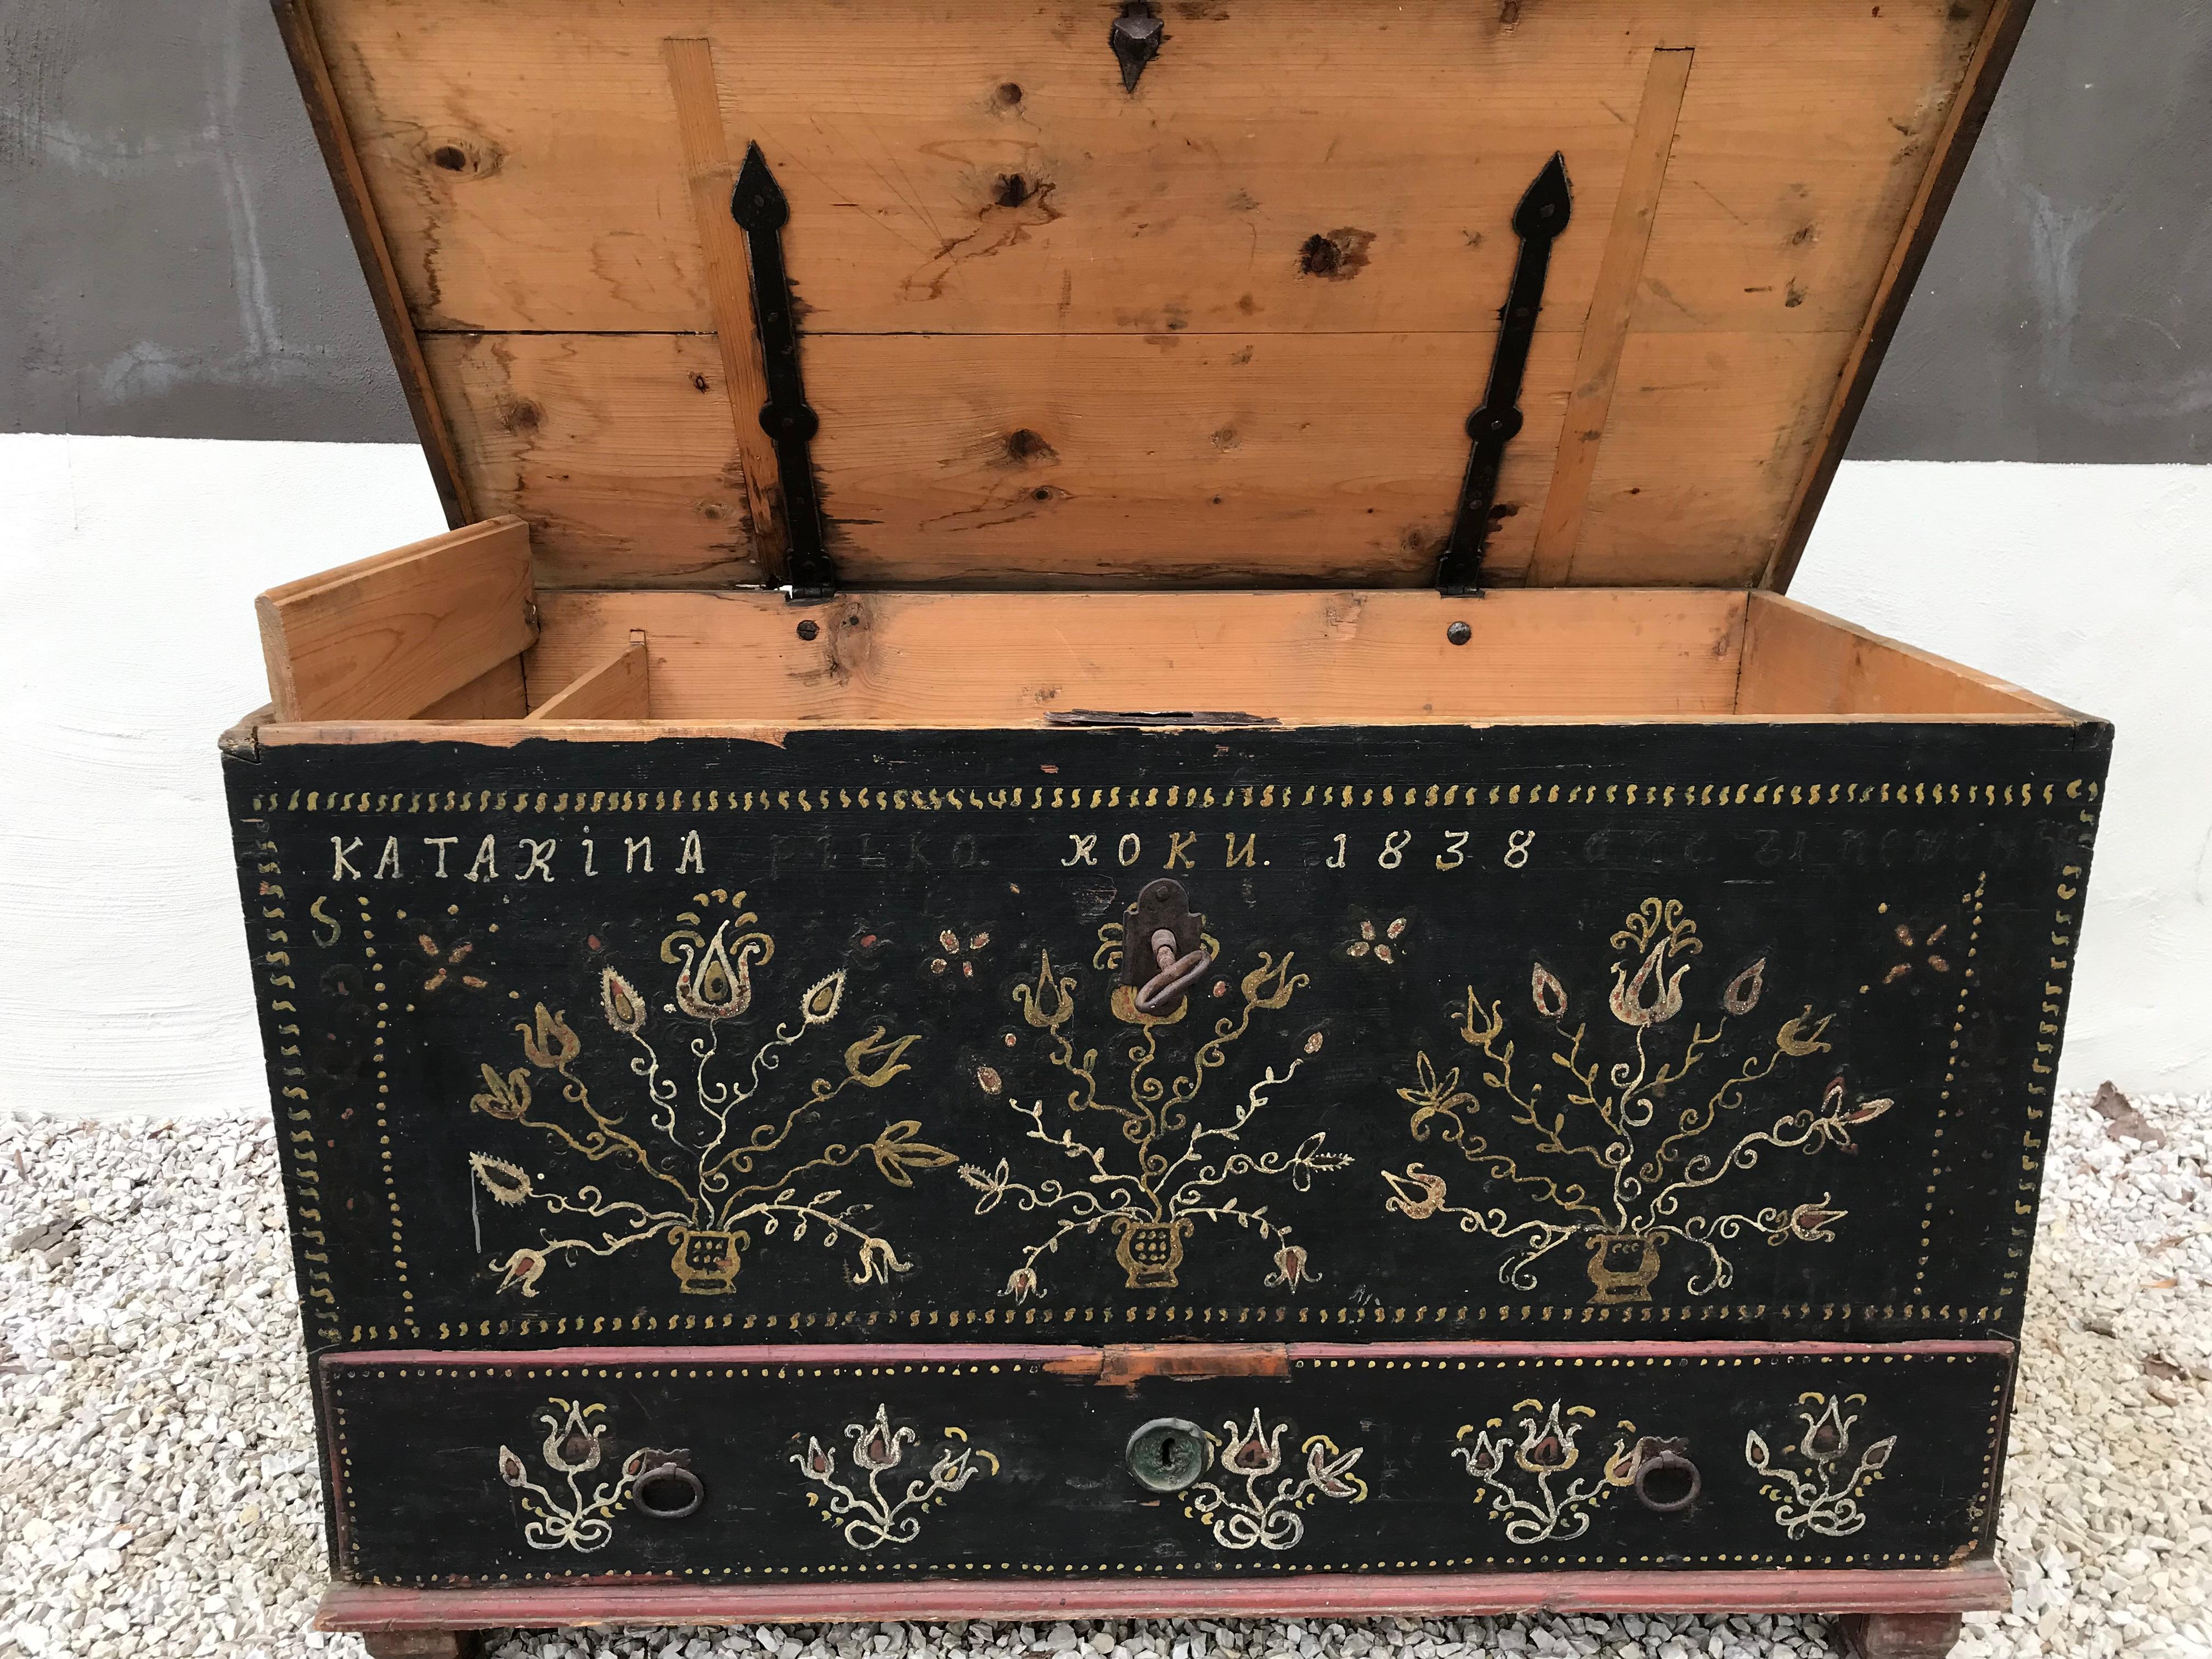 This painted chest of gold and silver dust comes from
Slovakia, year 1838.